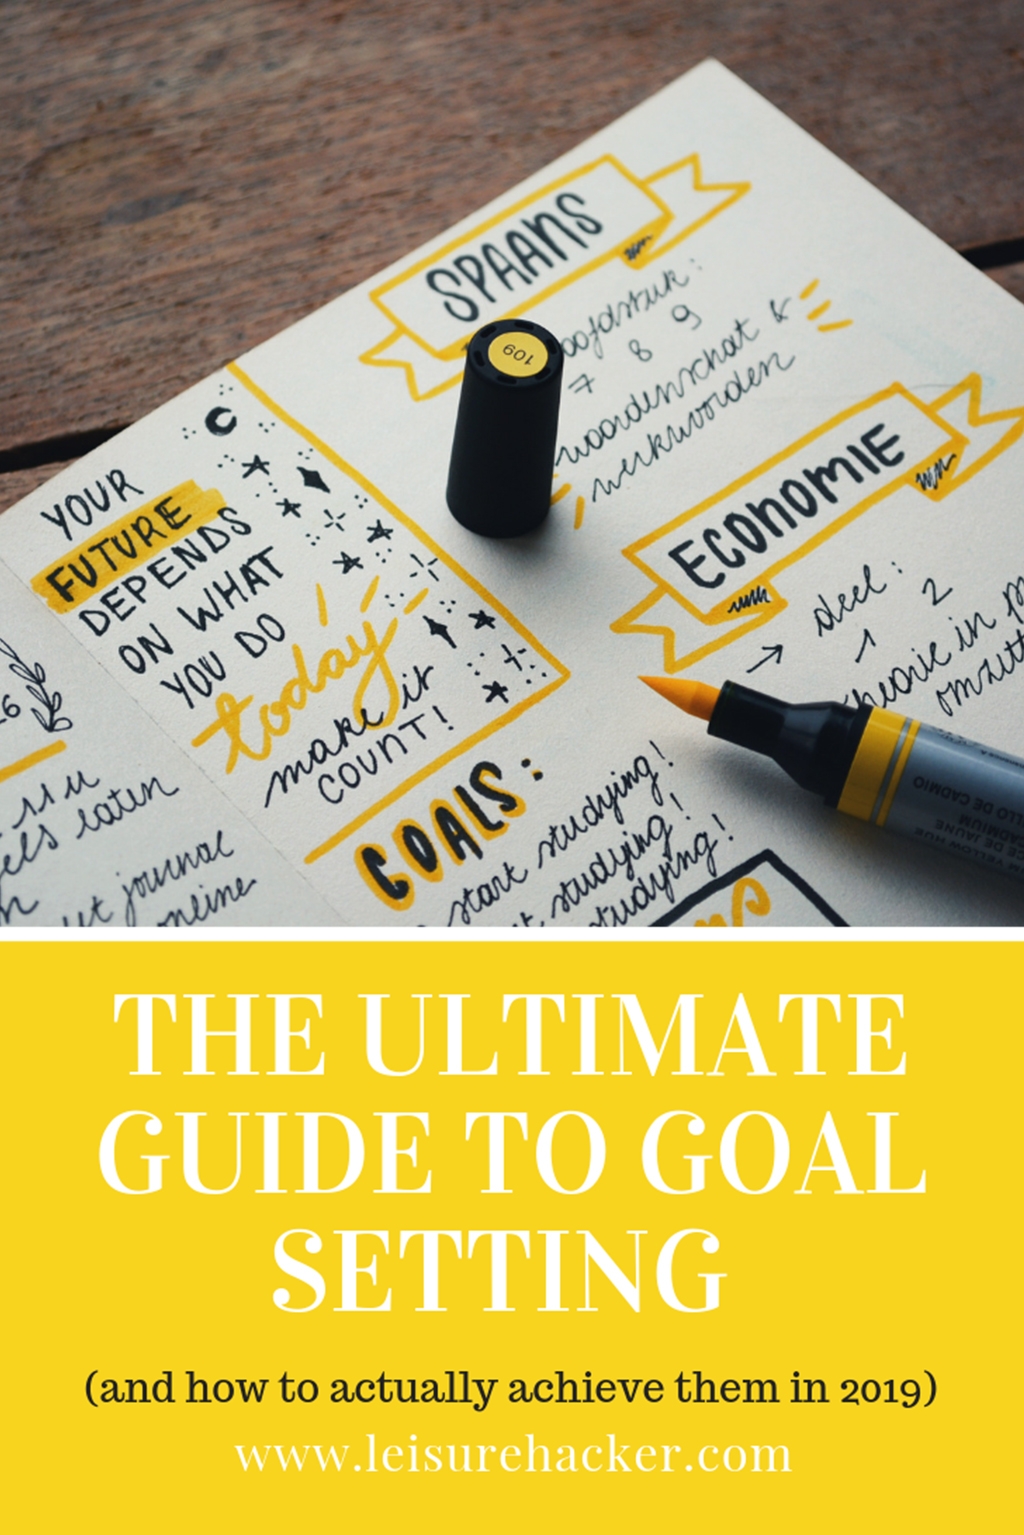 The ultimate guide to goal setting (and how to actually achieve them in 2019)